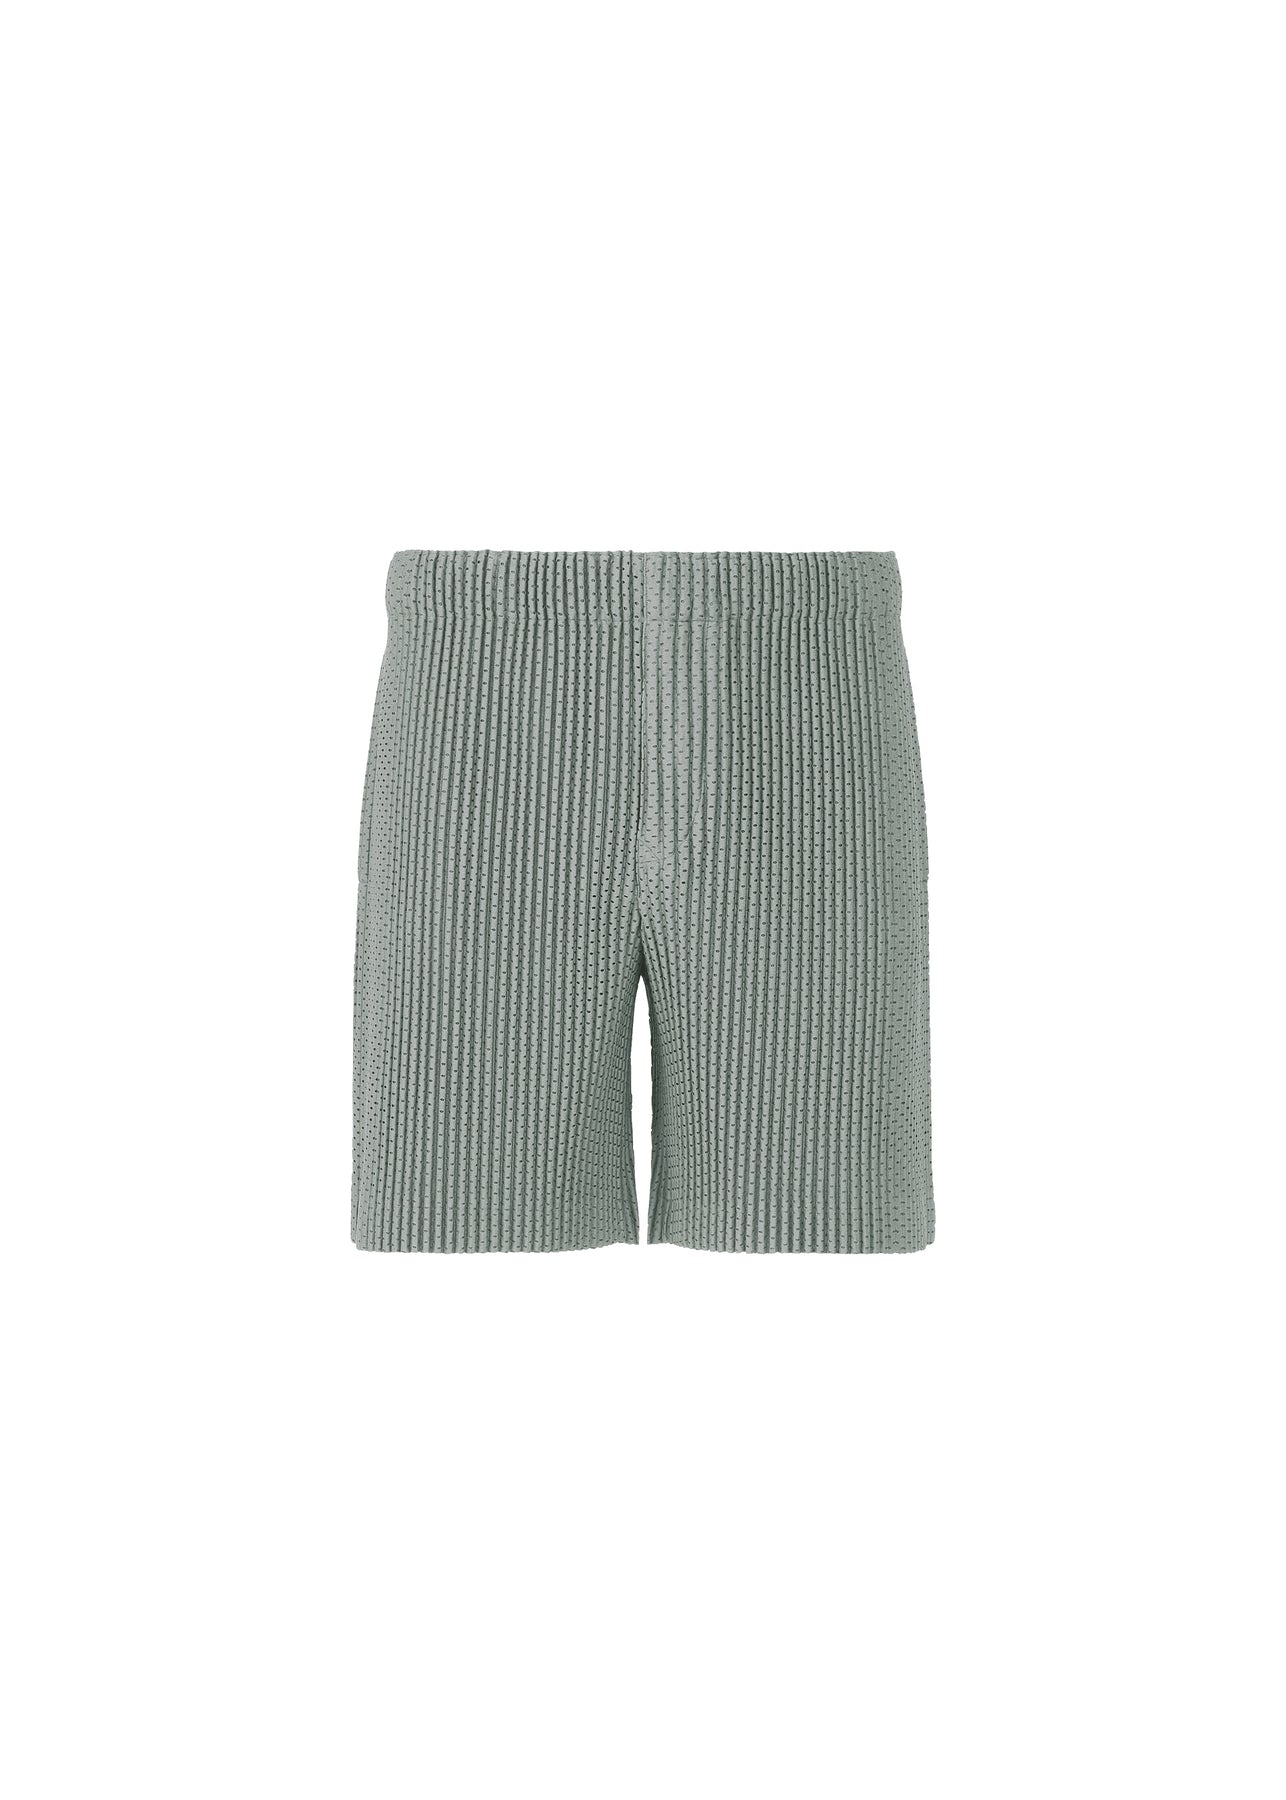 OUTER MESH SHORTS | The official ISSEY MIYAKE ONLINE STORE | ISSEY